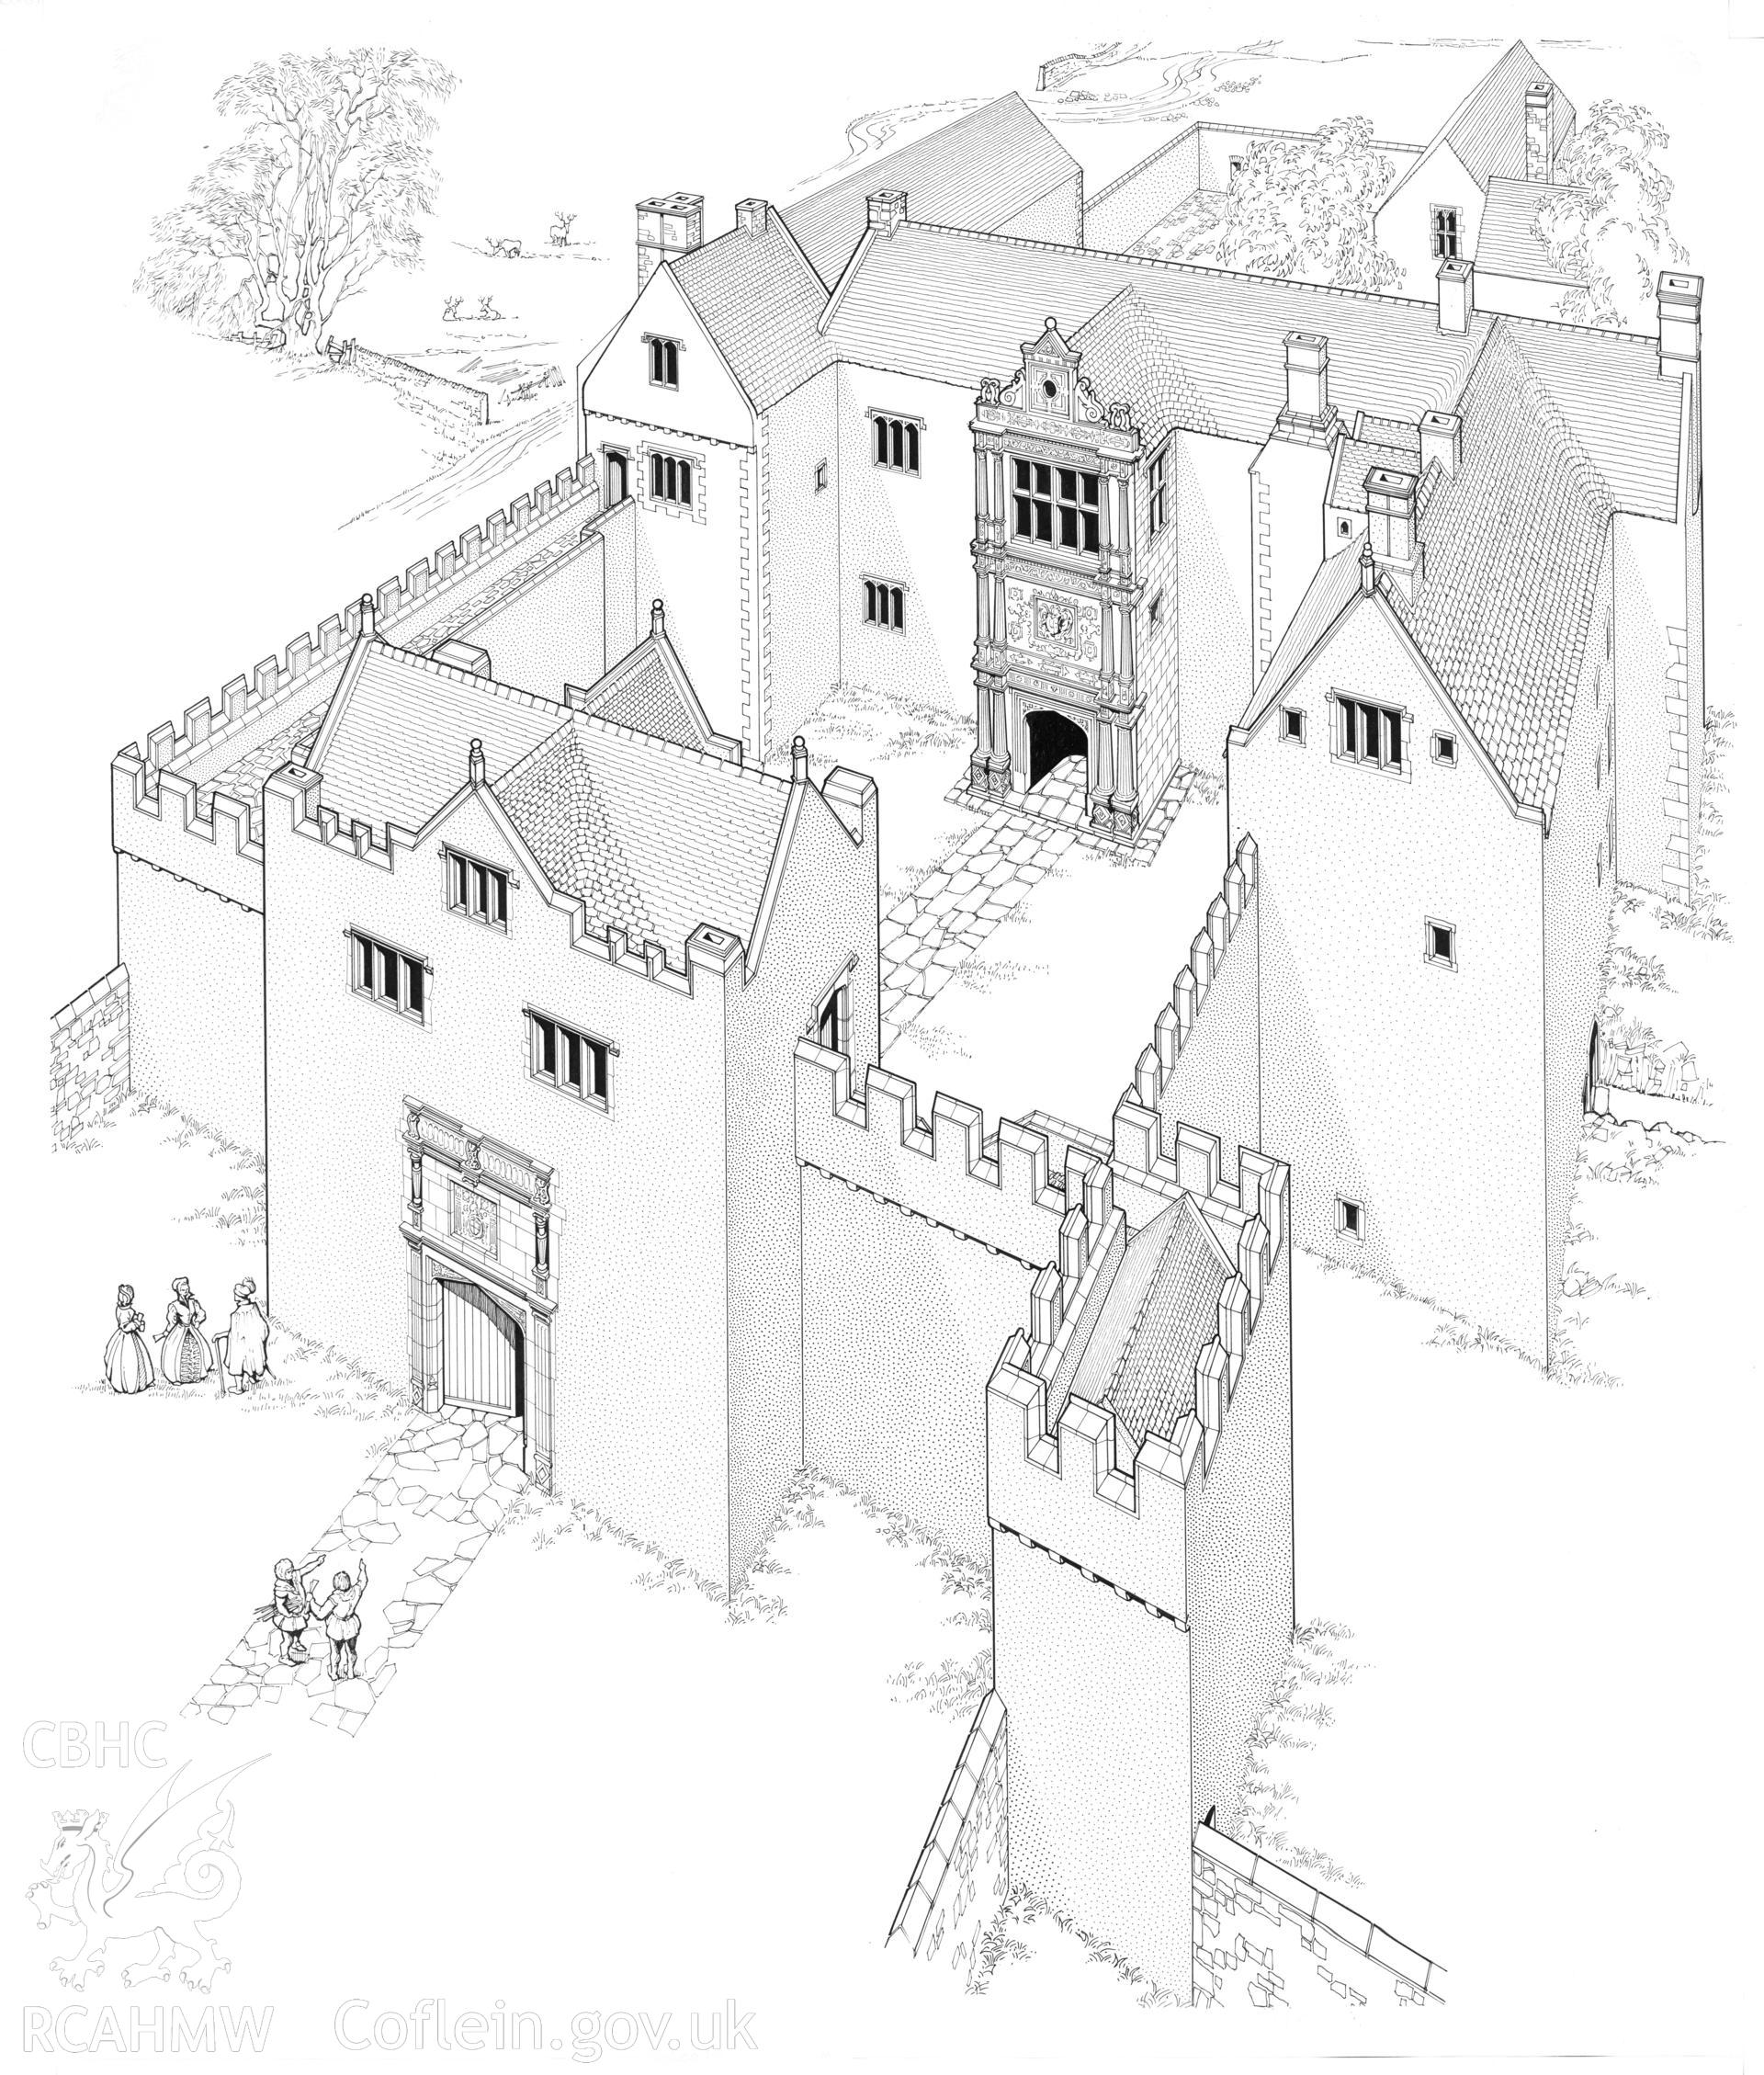 RCAHMW drawing showing exterior view of Old Beaupre, St Hilary.